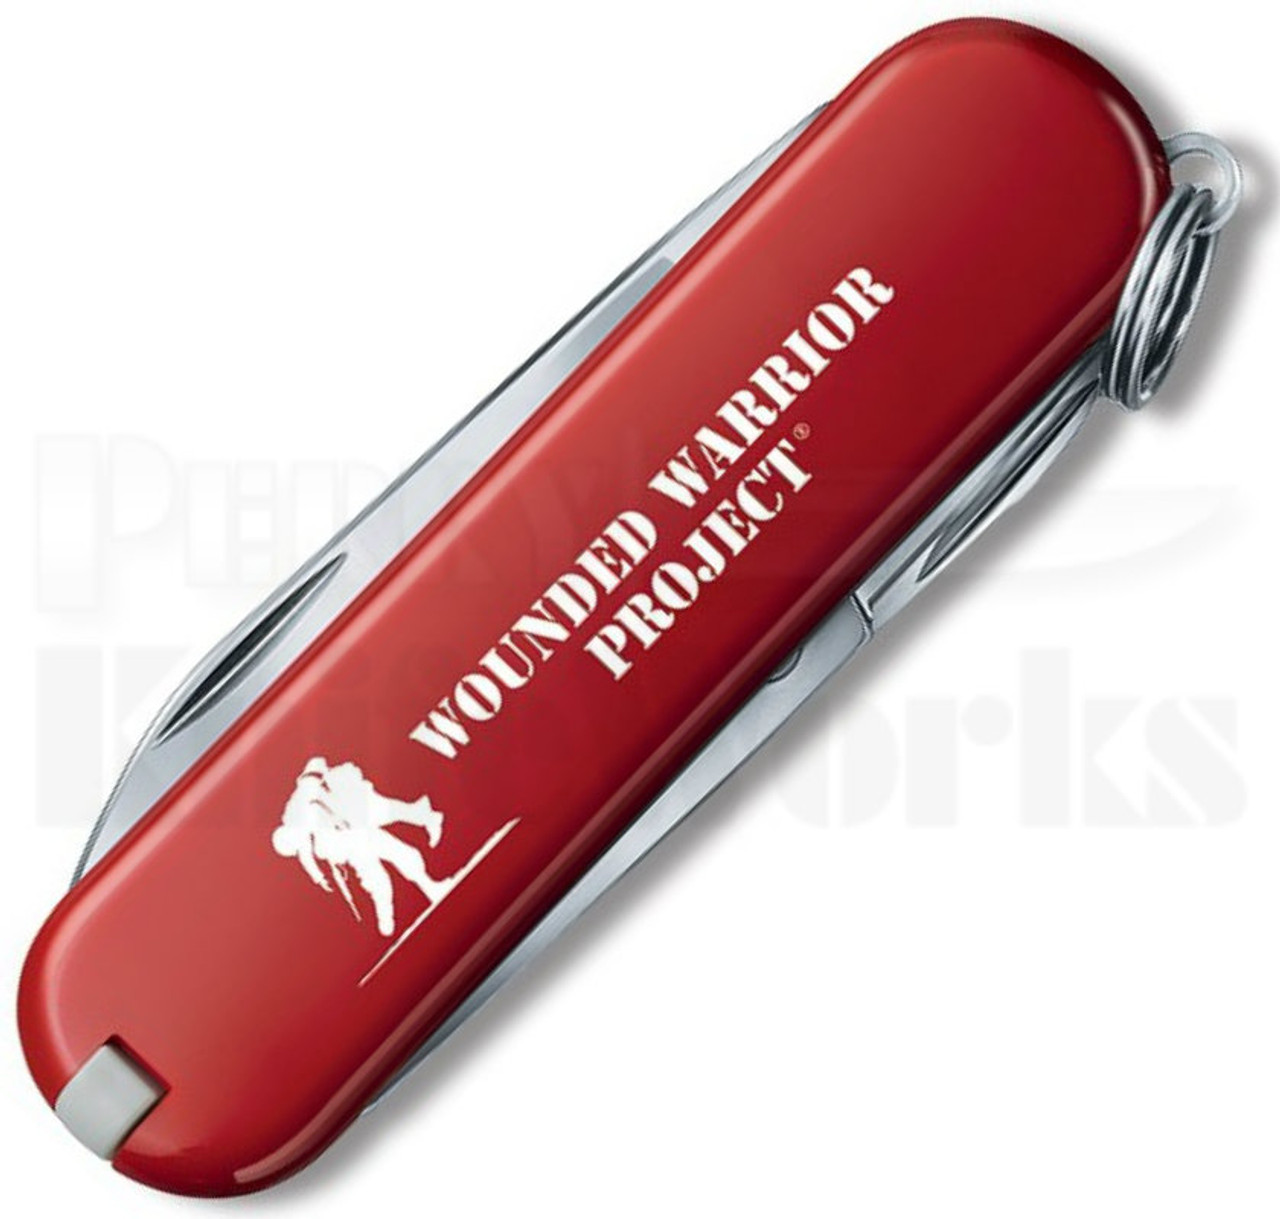 Victorinox Wounded Warrior Project Classic SD Knife (Red)